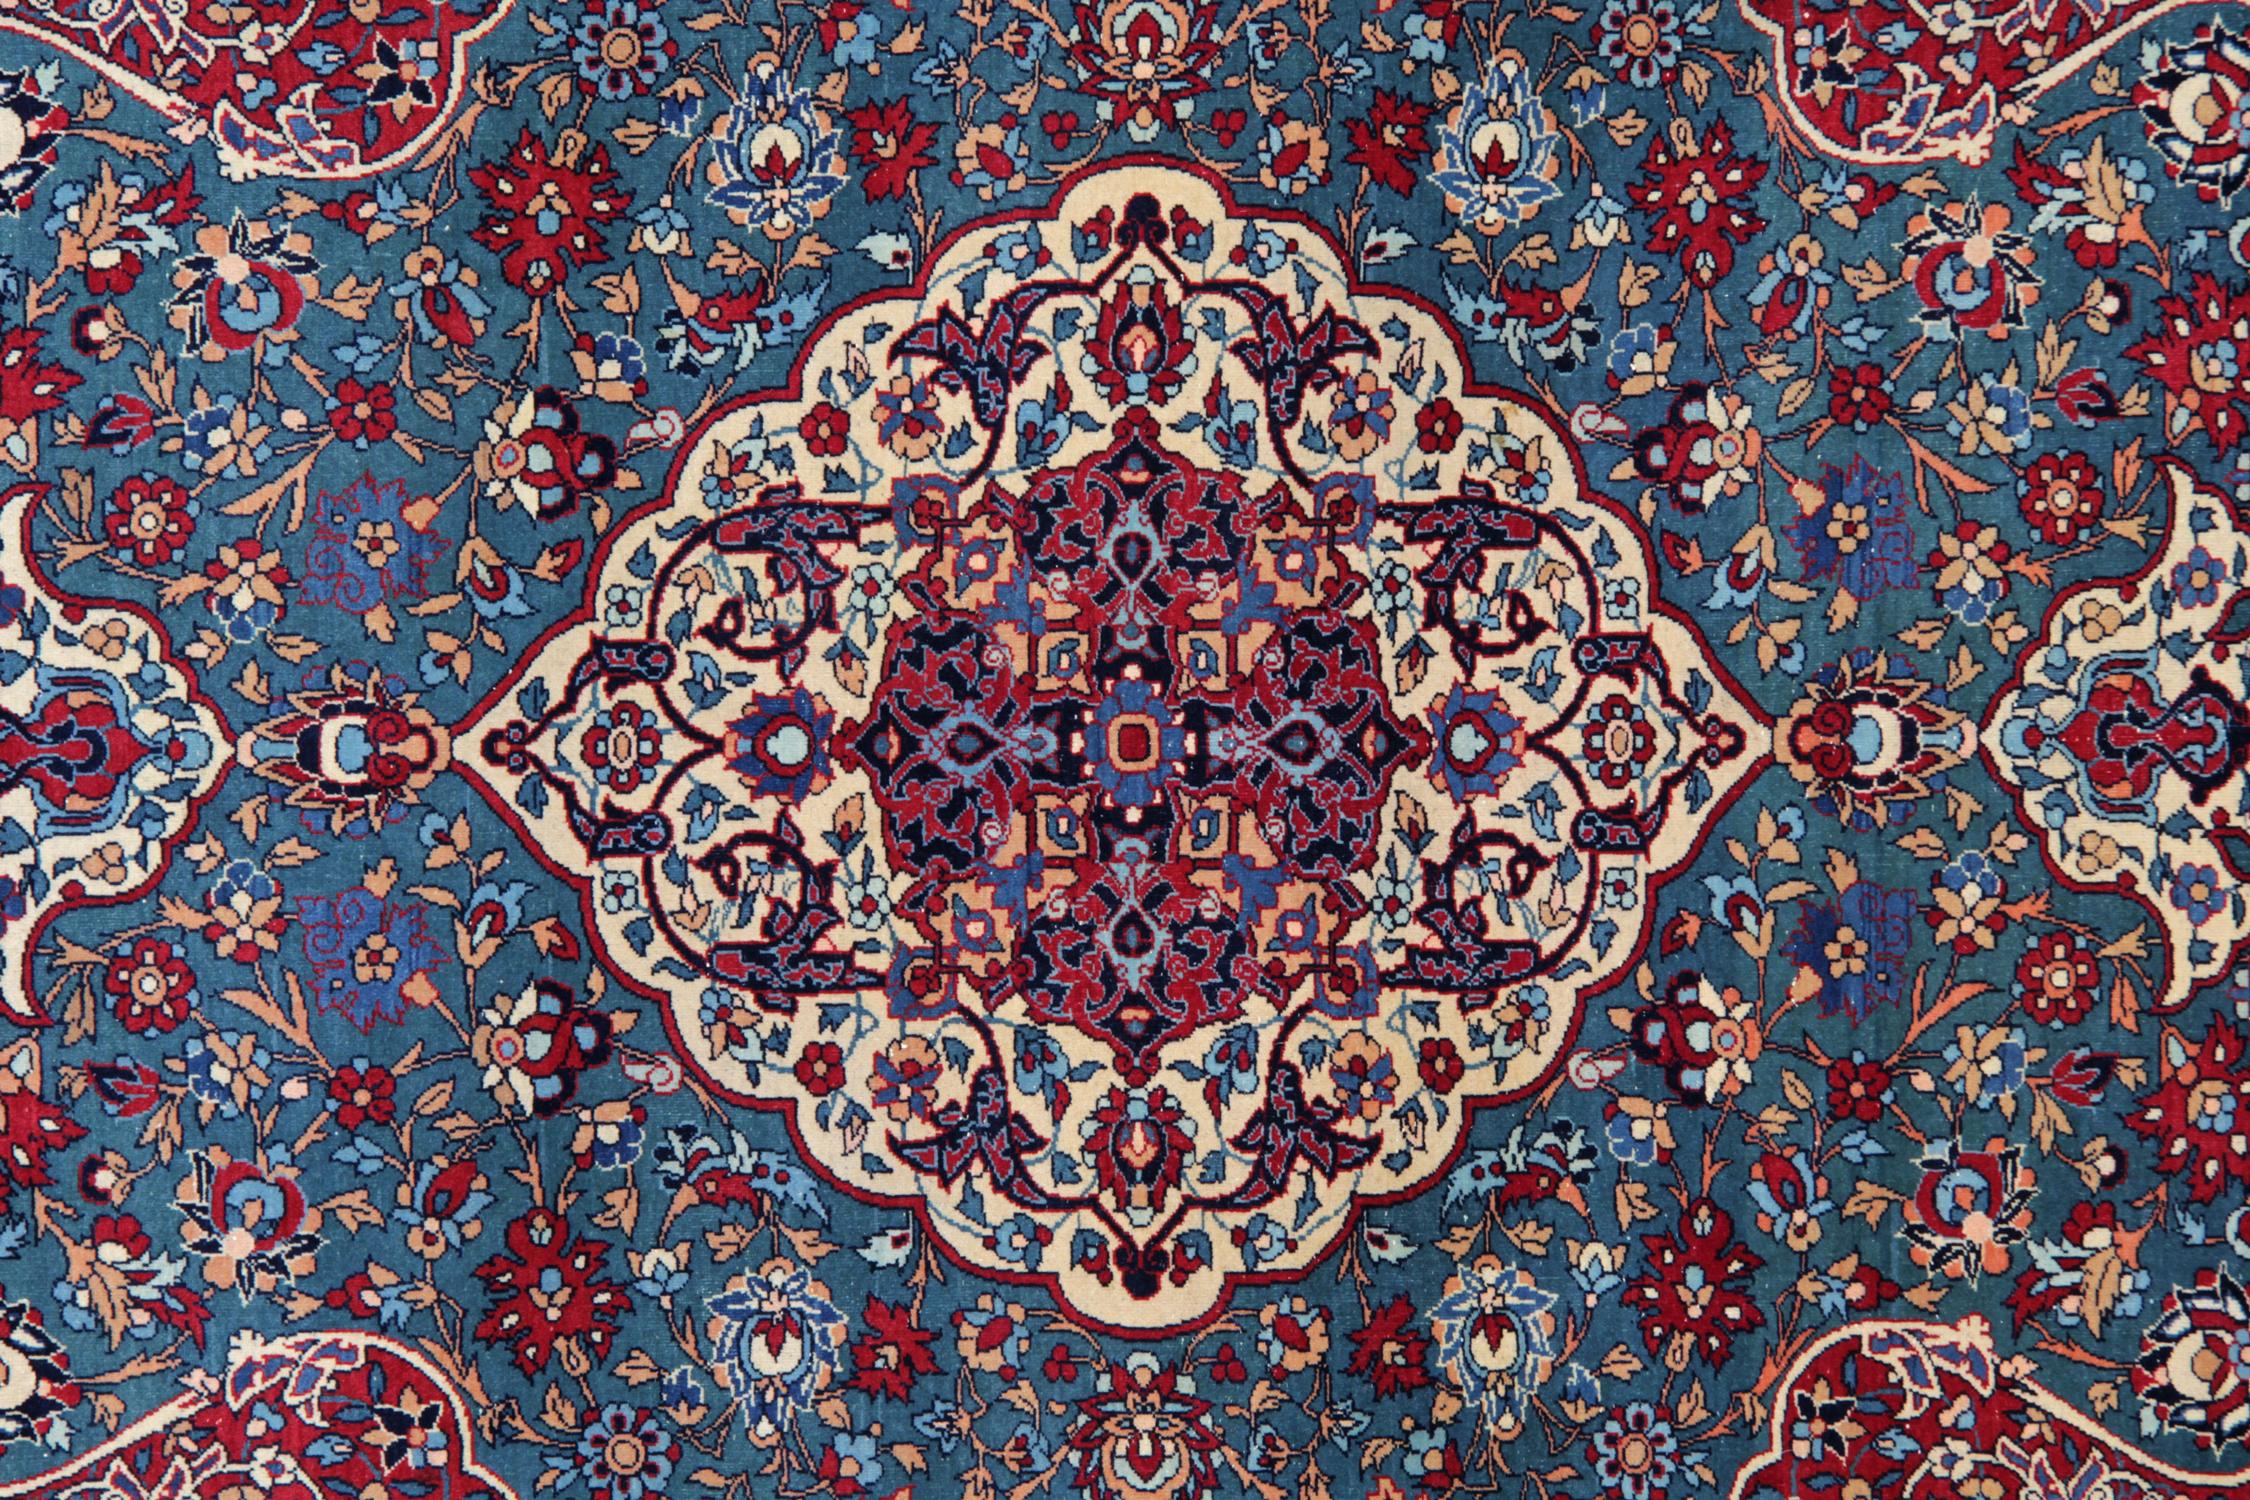 This rare wool rug is a fine example of an antique wool Rug woven by hand in the 1880s. Featuring a traditional intricate central medallion woven on a cream field that floats on a teal blue background with floral motifs and scrolls running through